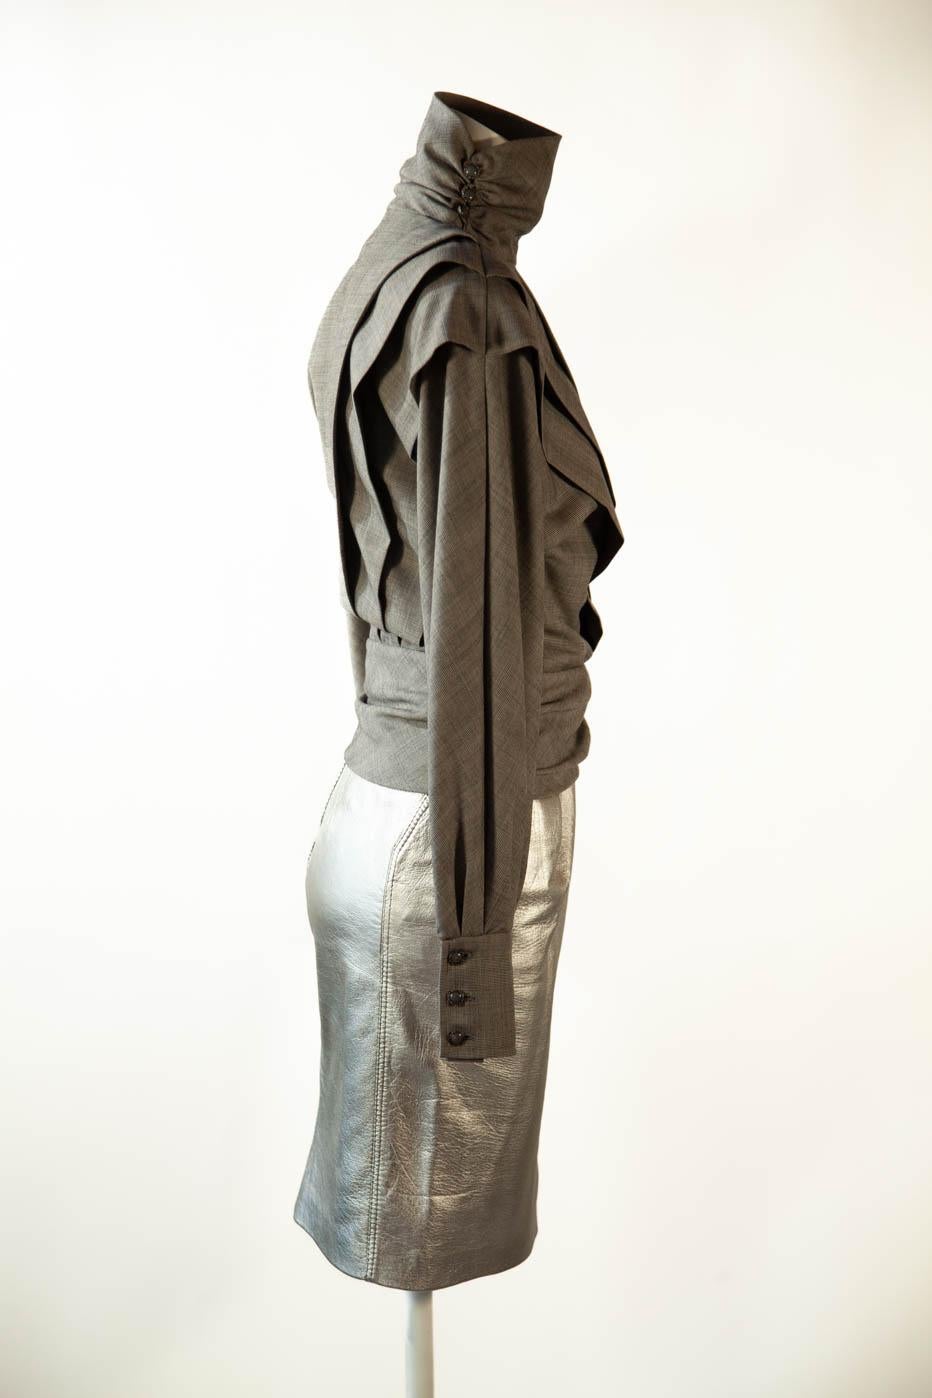 Ungaro Parallele Paris wool blend blouse and leather skirt. Blouse with sculptural design, grey, long balloon sleeves with cavalier cuffs.  Measures: Bust 36